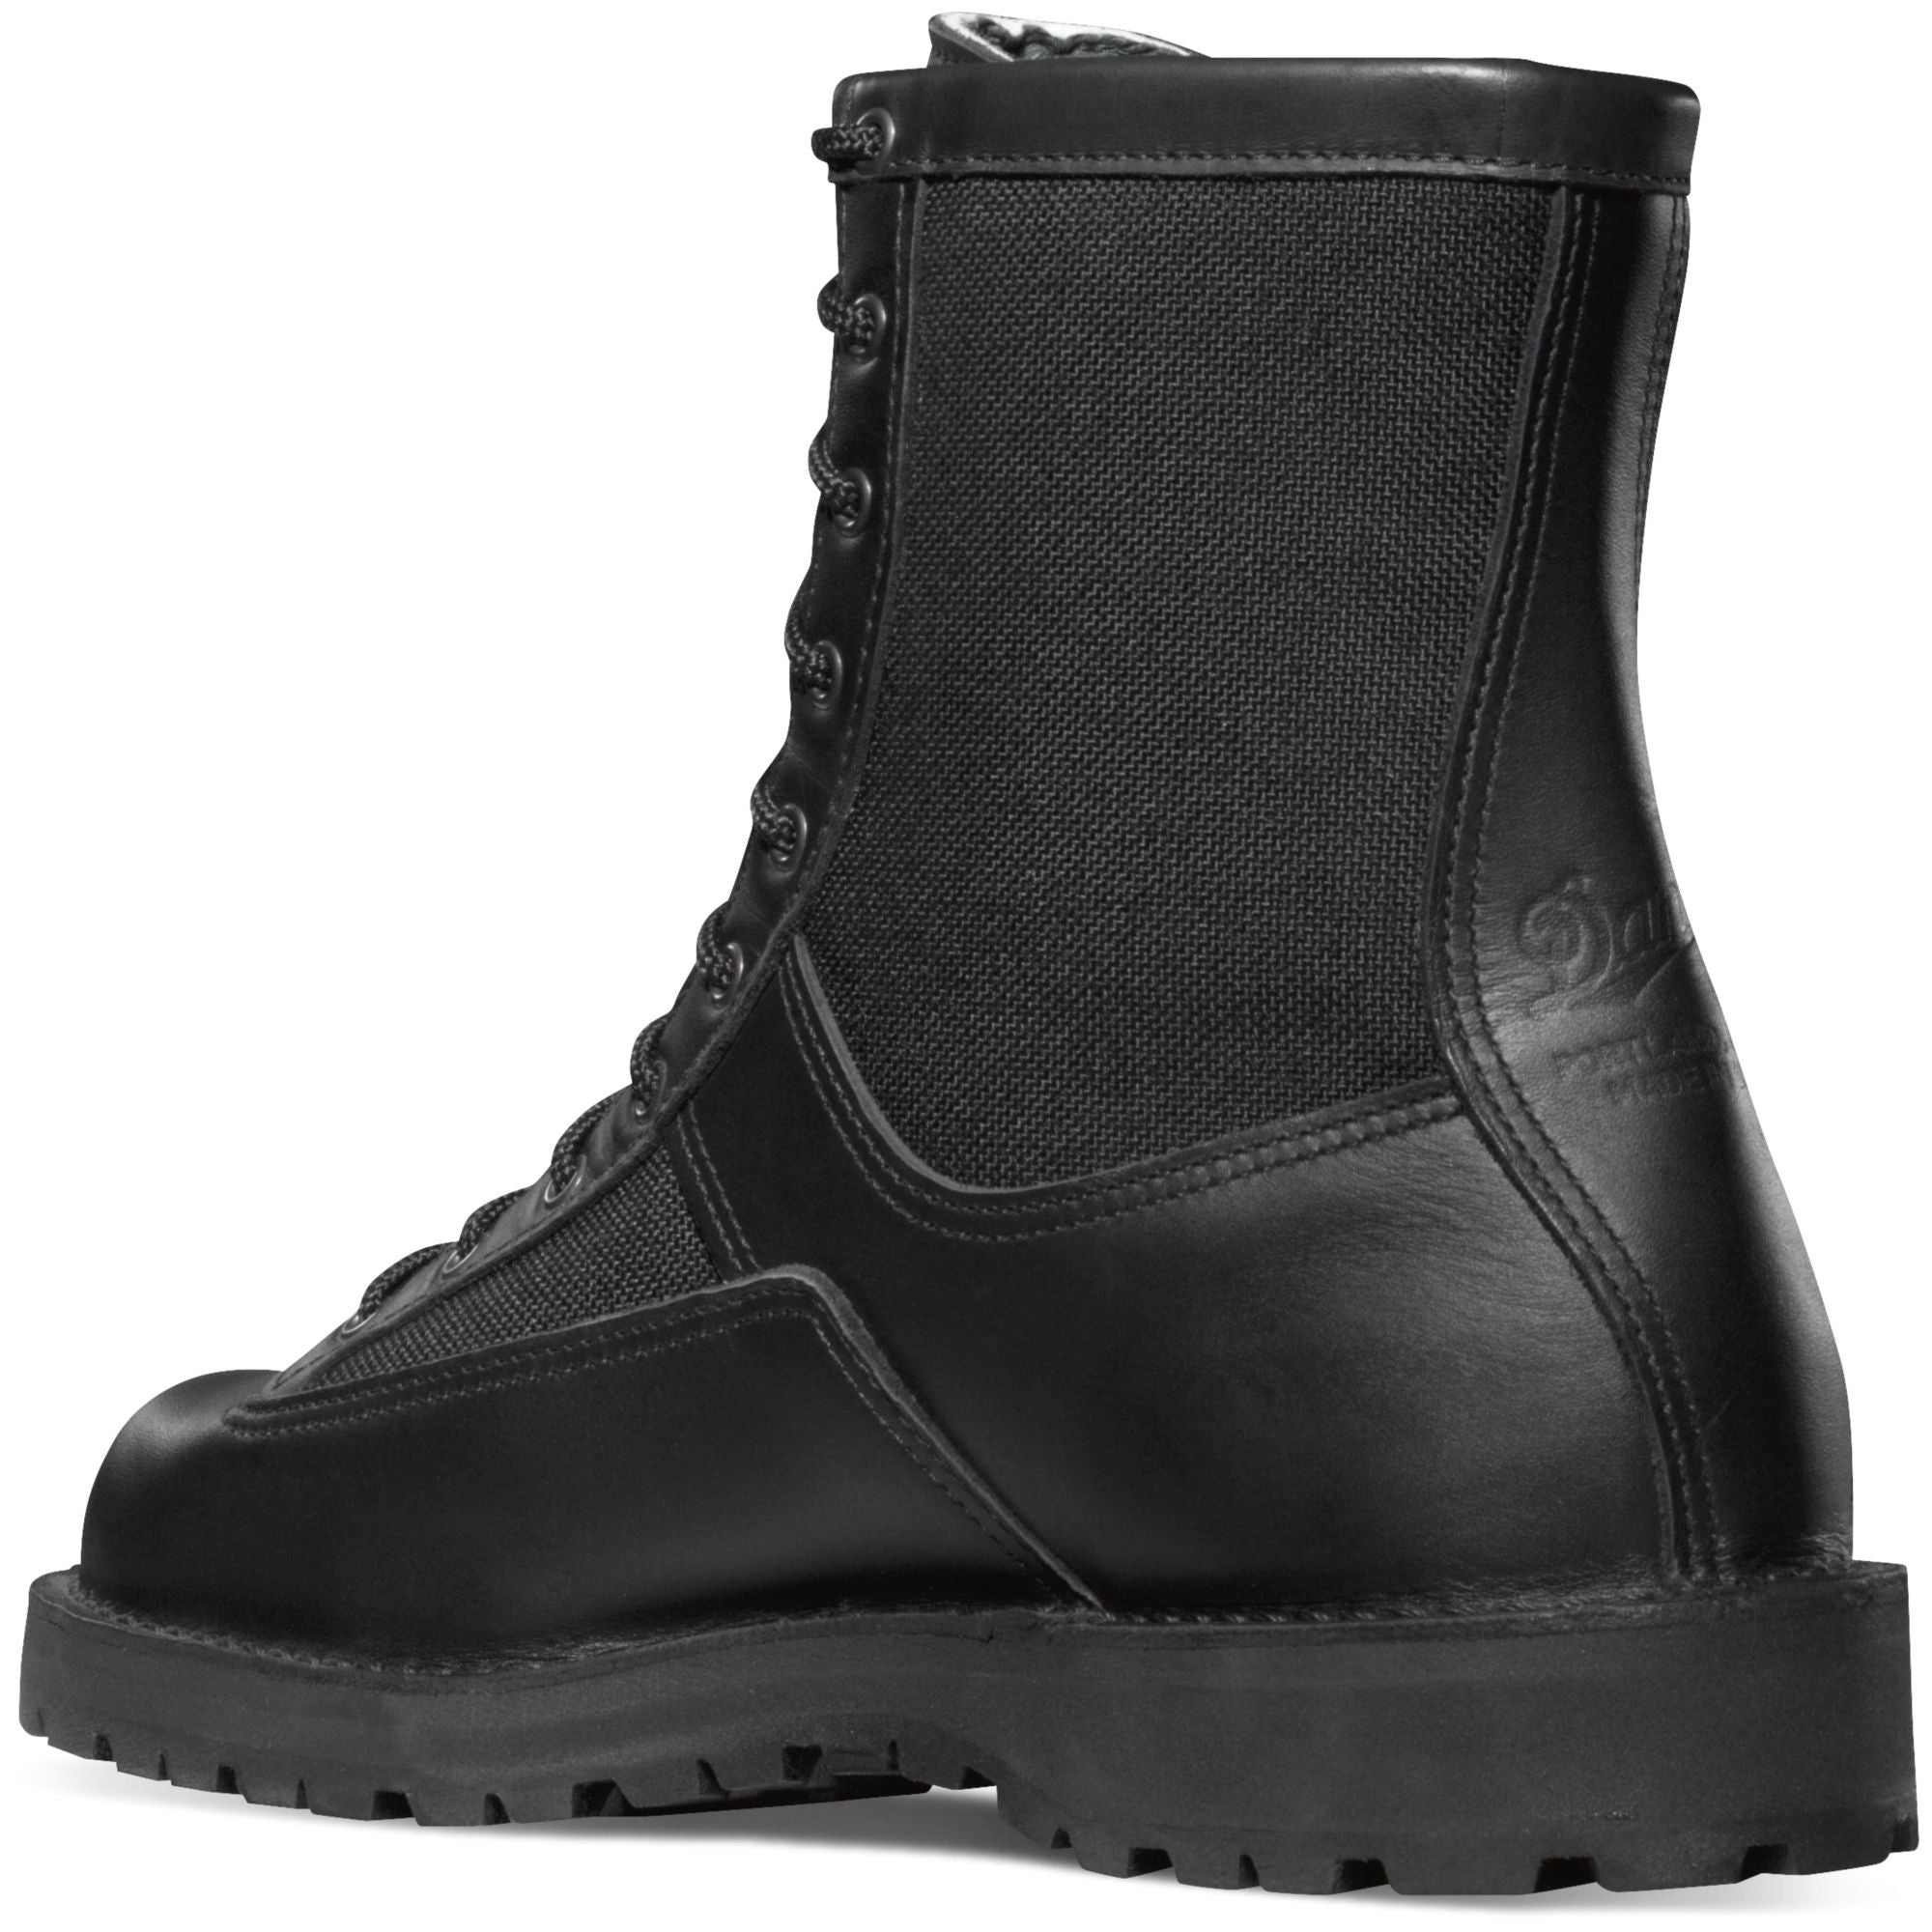 Danner Men's Acadia USA Made 8" Insulated WP Duty Boot - Black - 22600  - Overlook Boots